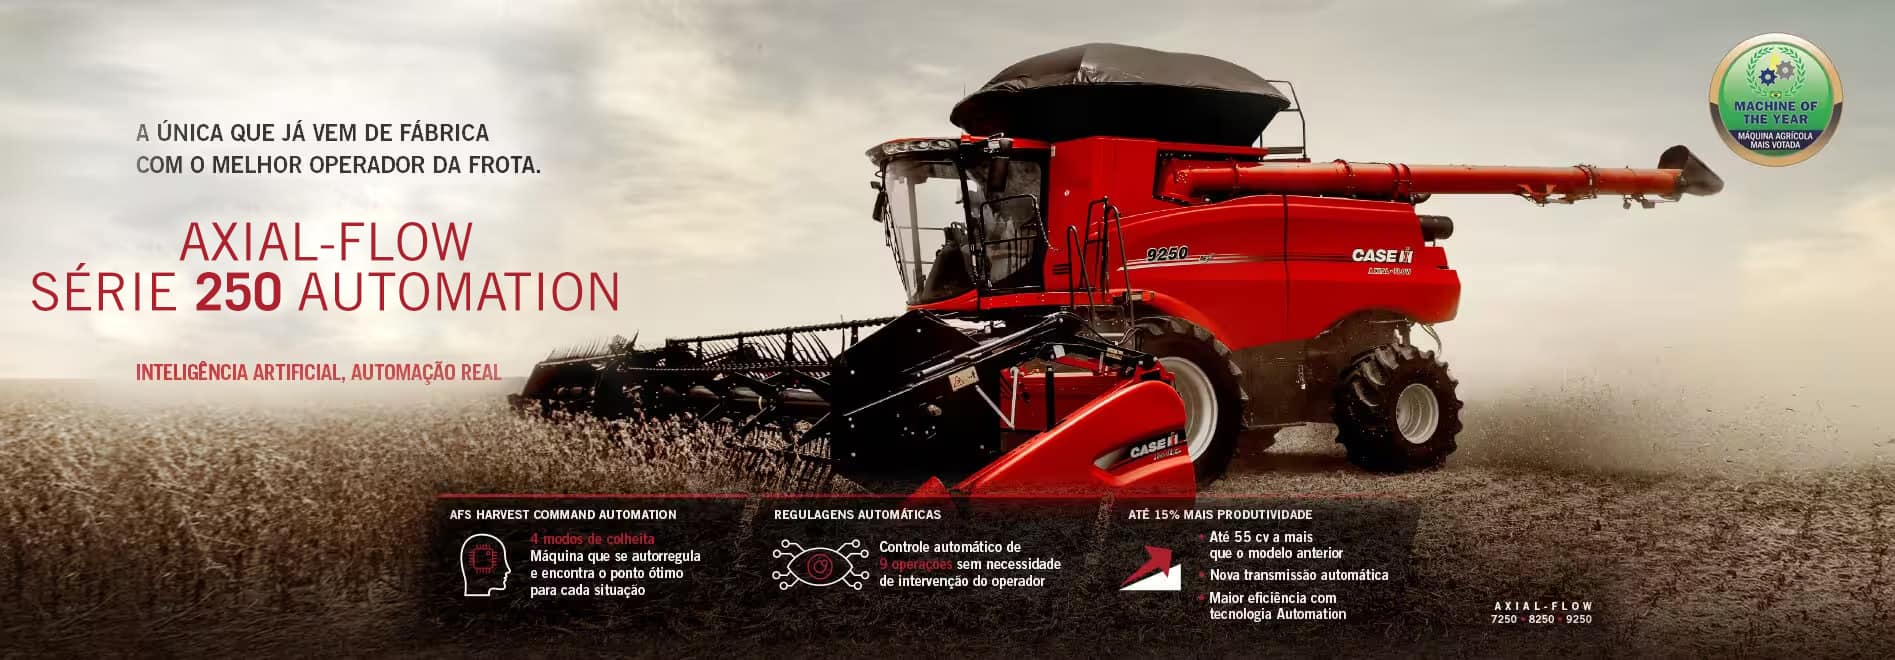 Axial-Flow 250 Automation